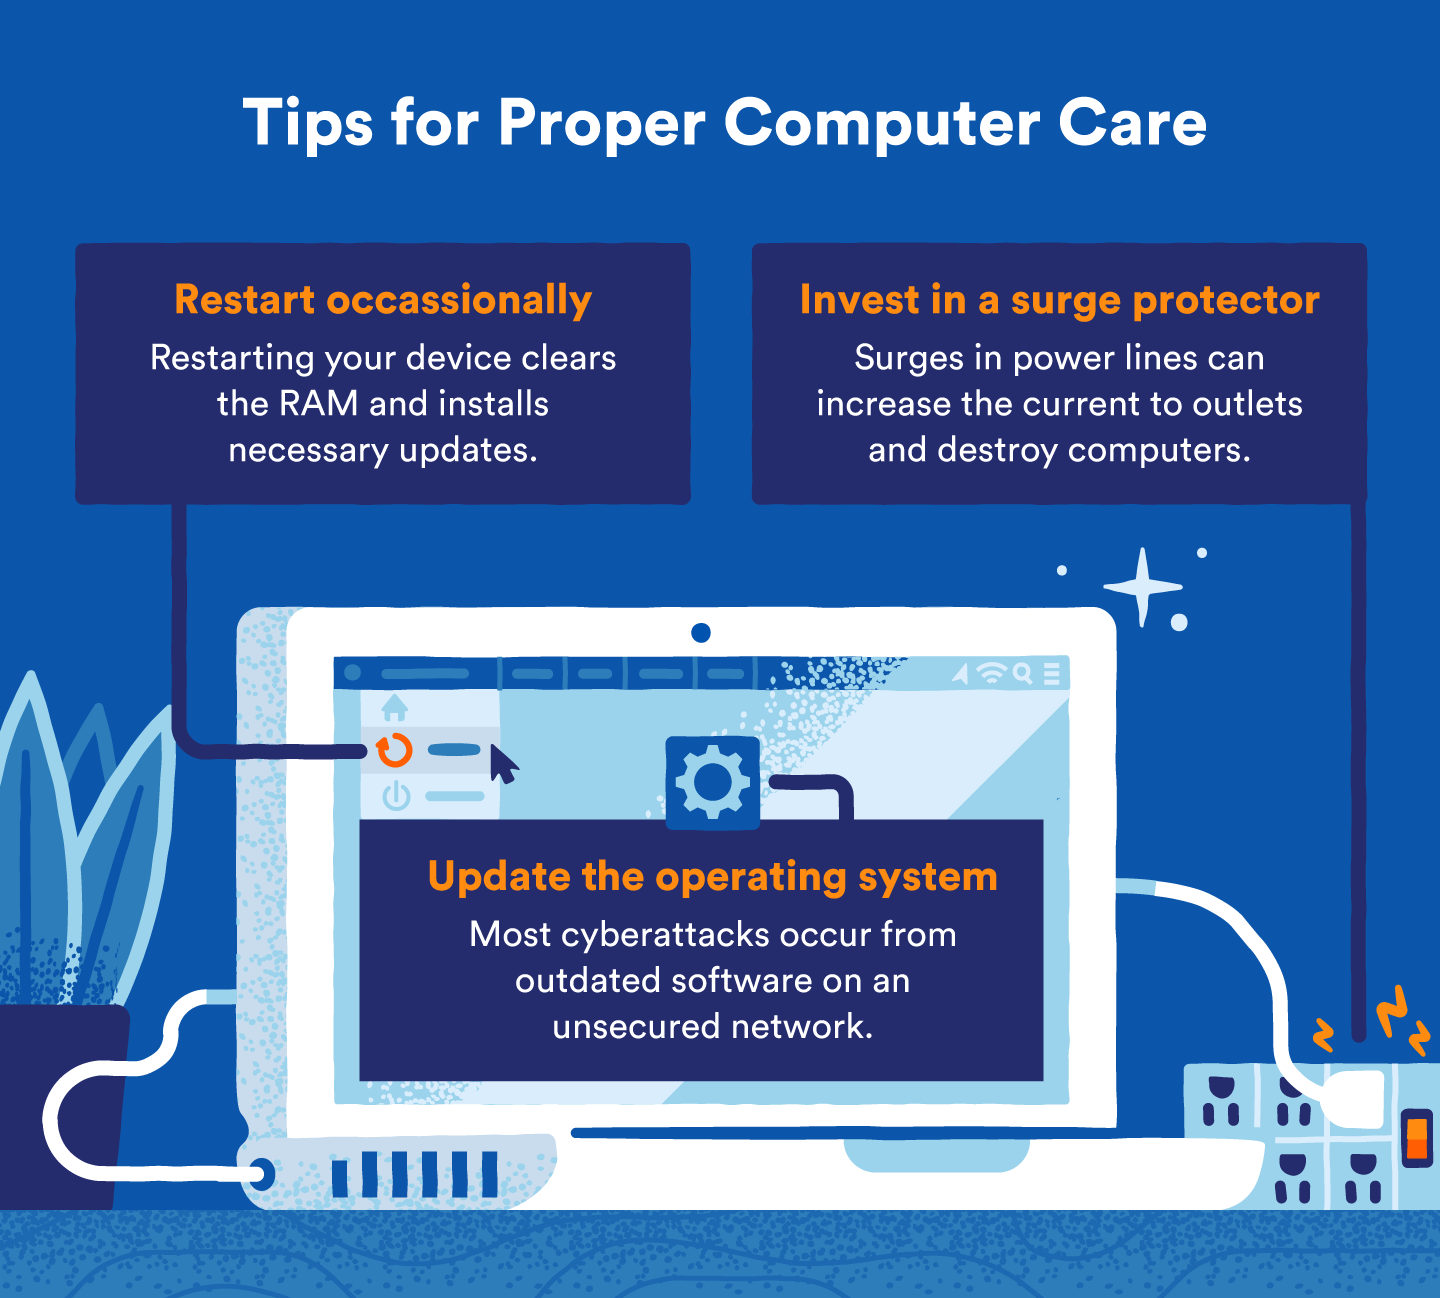 Tips for proper computer care